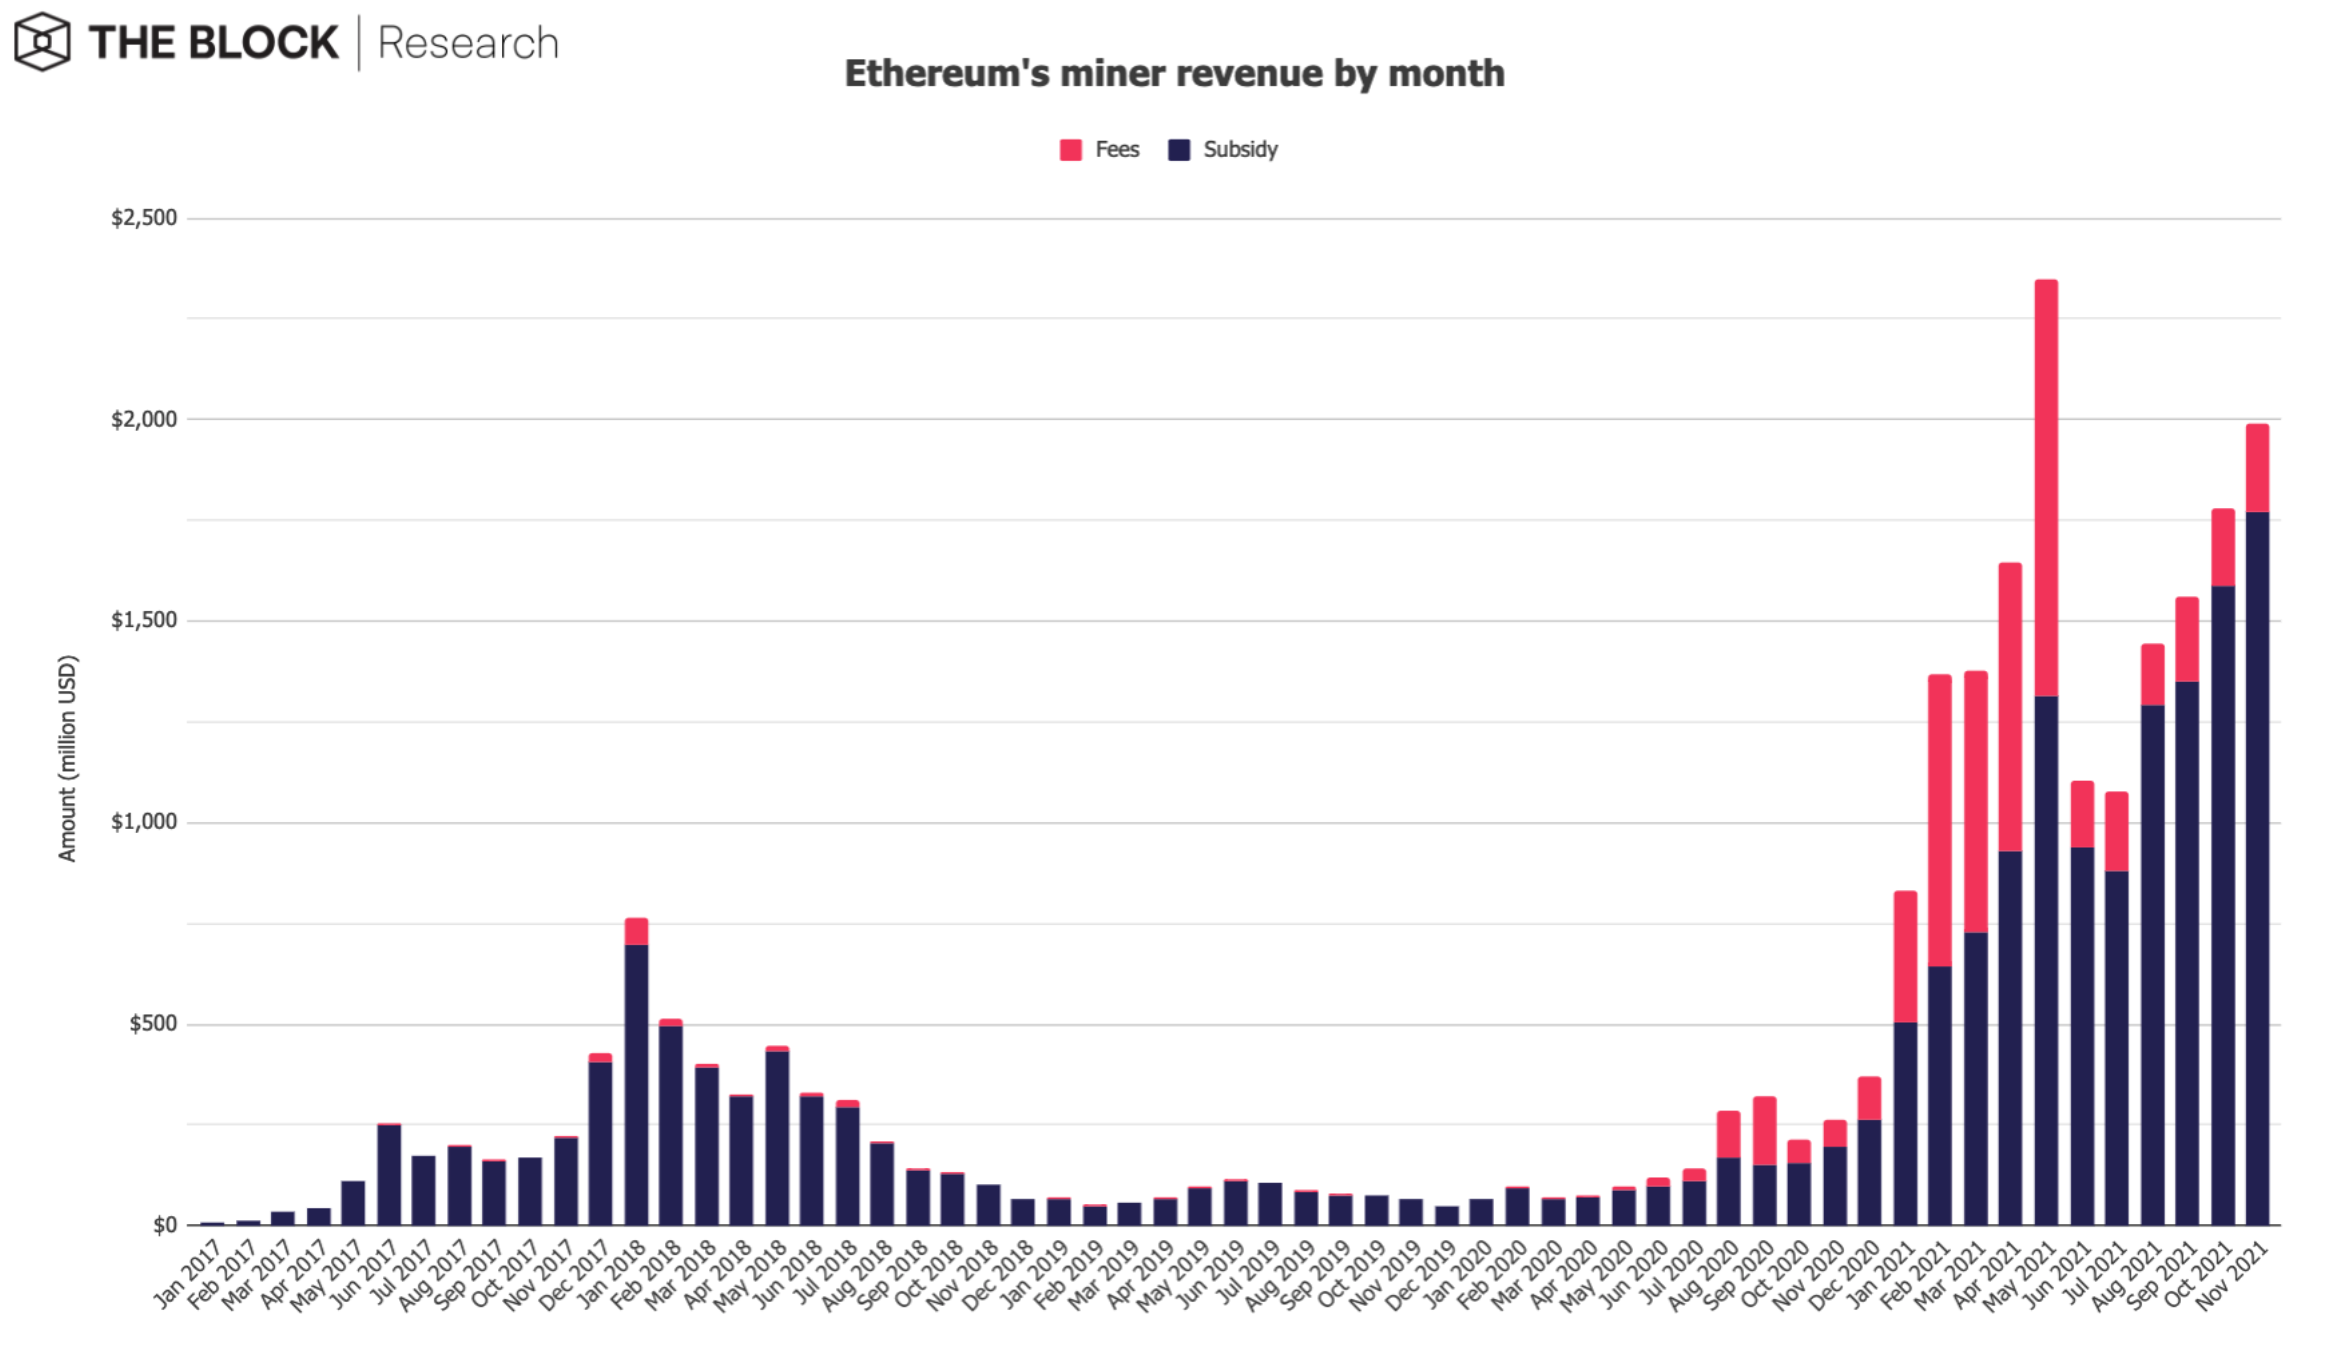 With the metaverse, NFTs and DeFi on the rise, Ethereum miners rake in $2 billion in revenue — a jump of 11% over October